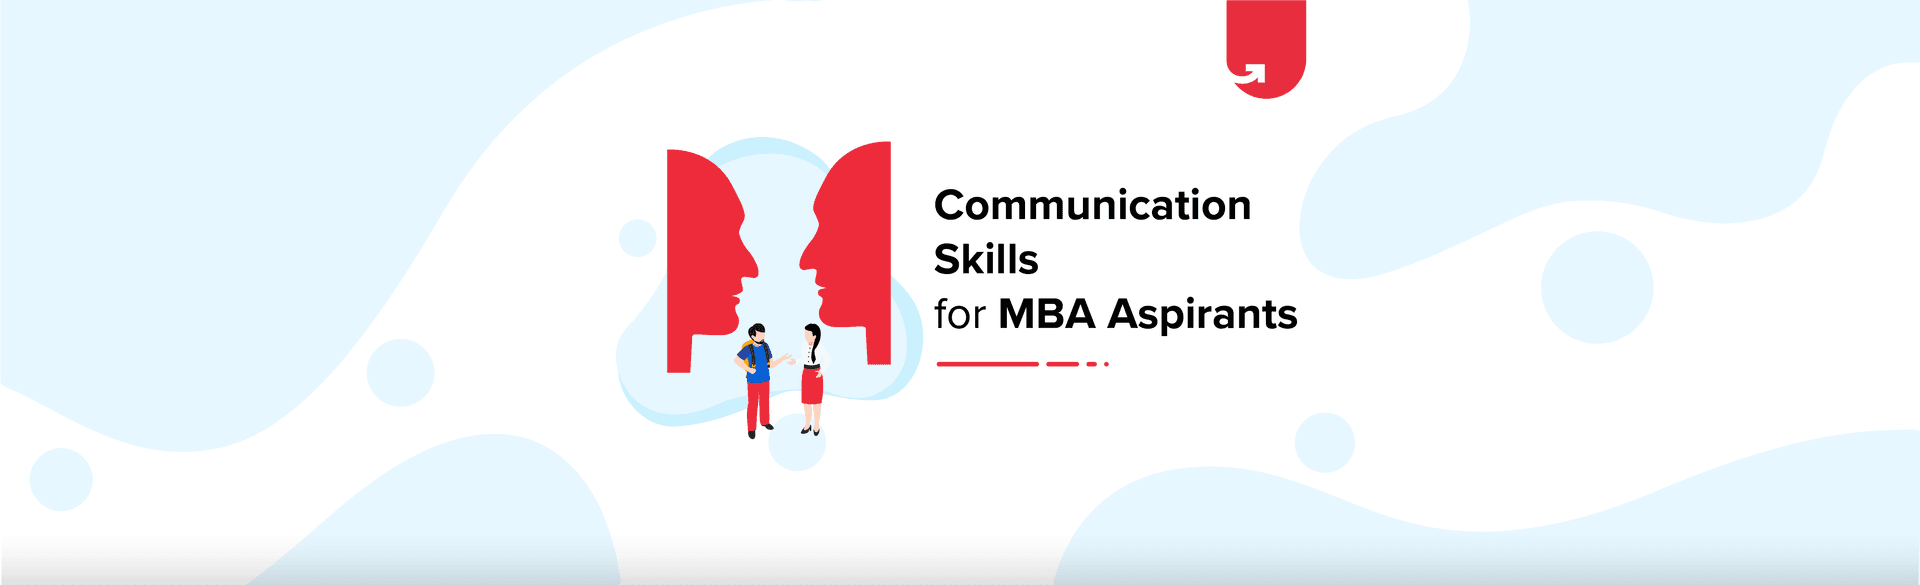 Why Communication Skills are Important for MBA Aspirants?